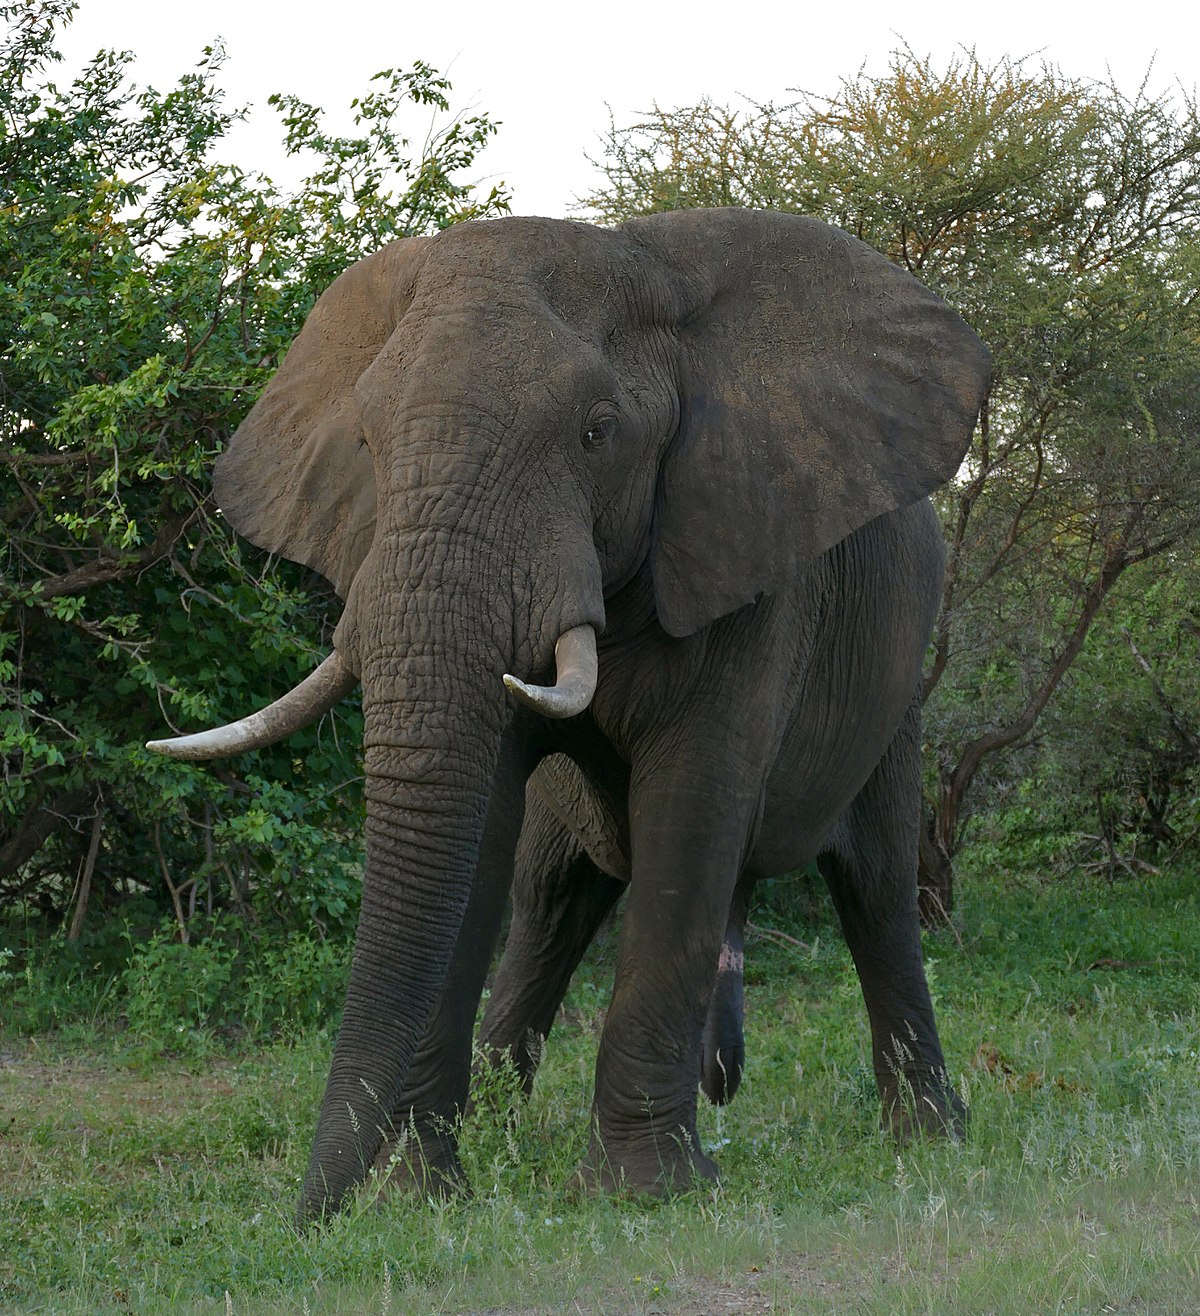 What are large elephants called?